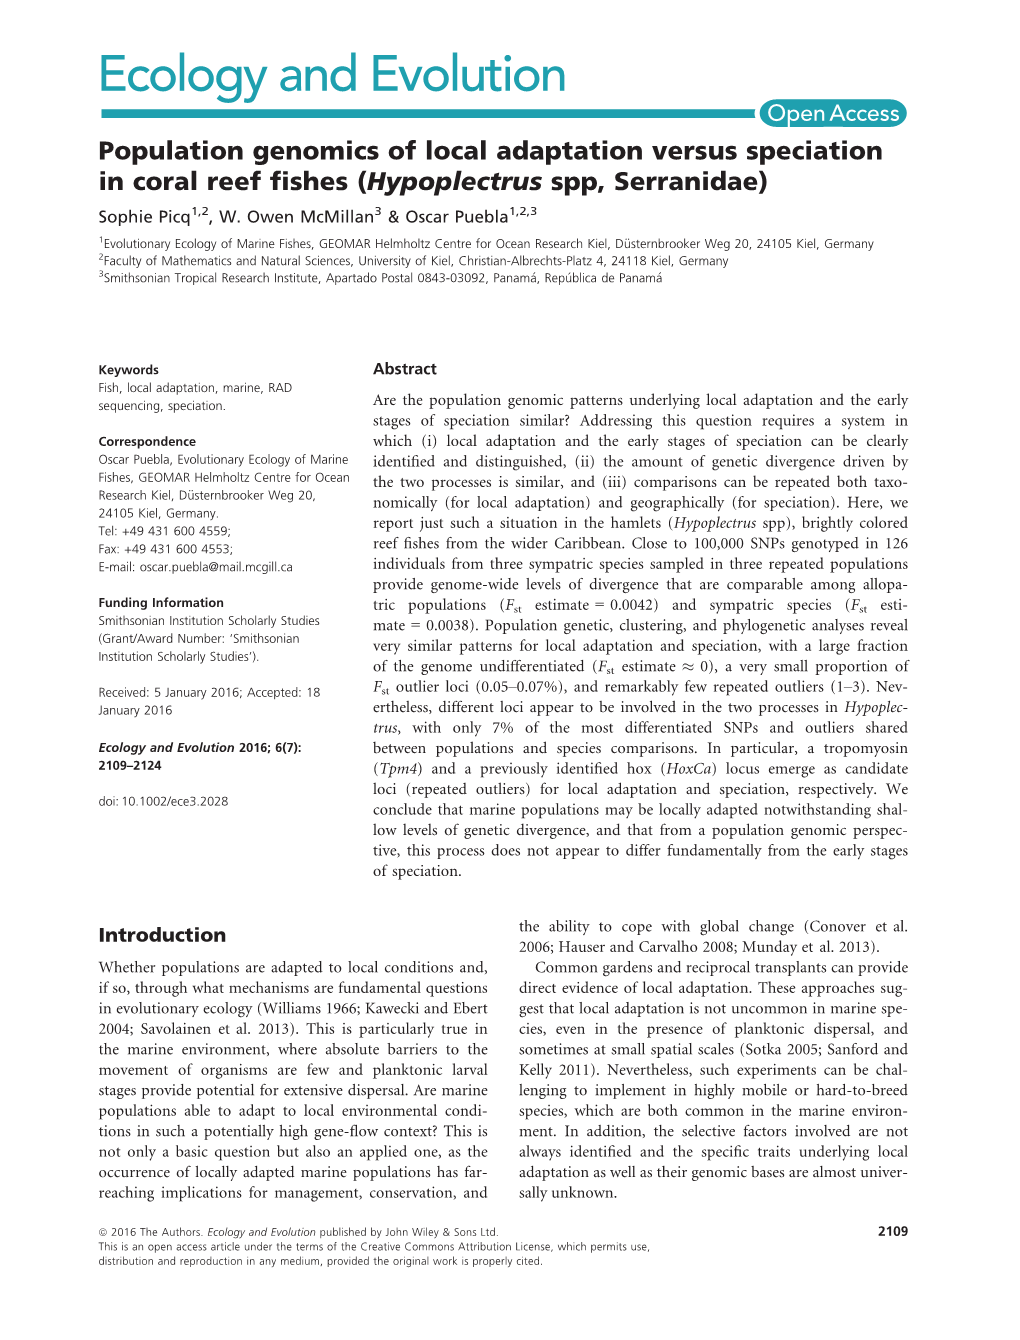 Population Genomics of Local Adaptation Versus Speciation in Coral Reef ﬁshes (Hypoplectrus Spp, Serranidae) Sophie Picq1,2, W